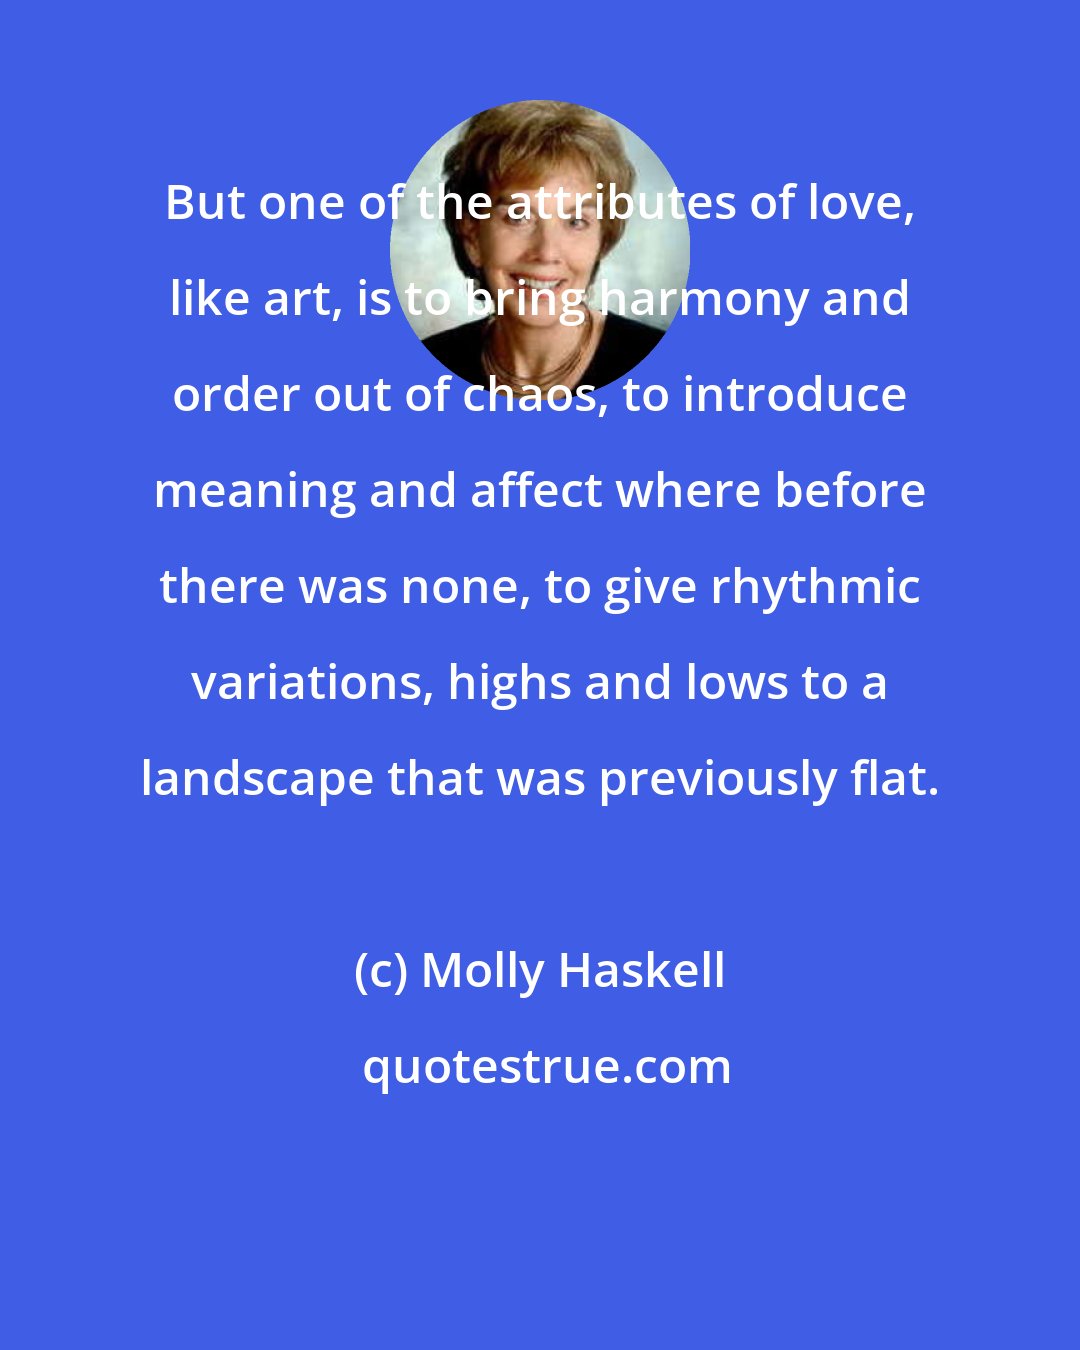 Molly Haskell: But one of the attributes of love, like art, is to bring harmony and order out of chaos, to introduce meaning and affect where before there was none, to give rhythmic variations, highs and lows to a landscape that was previously flat.